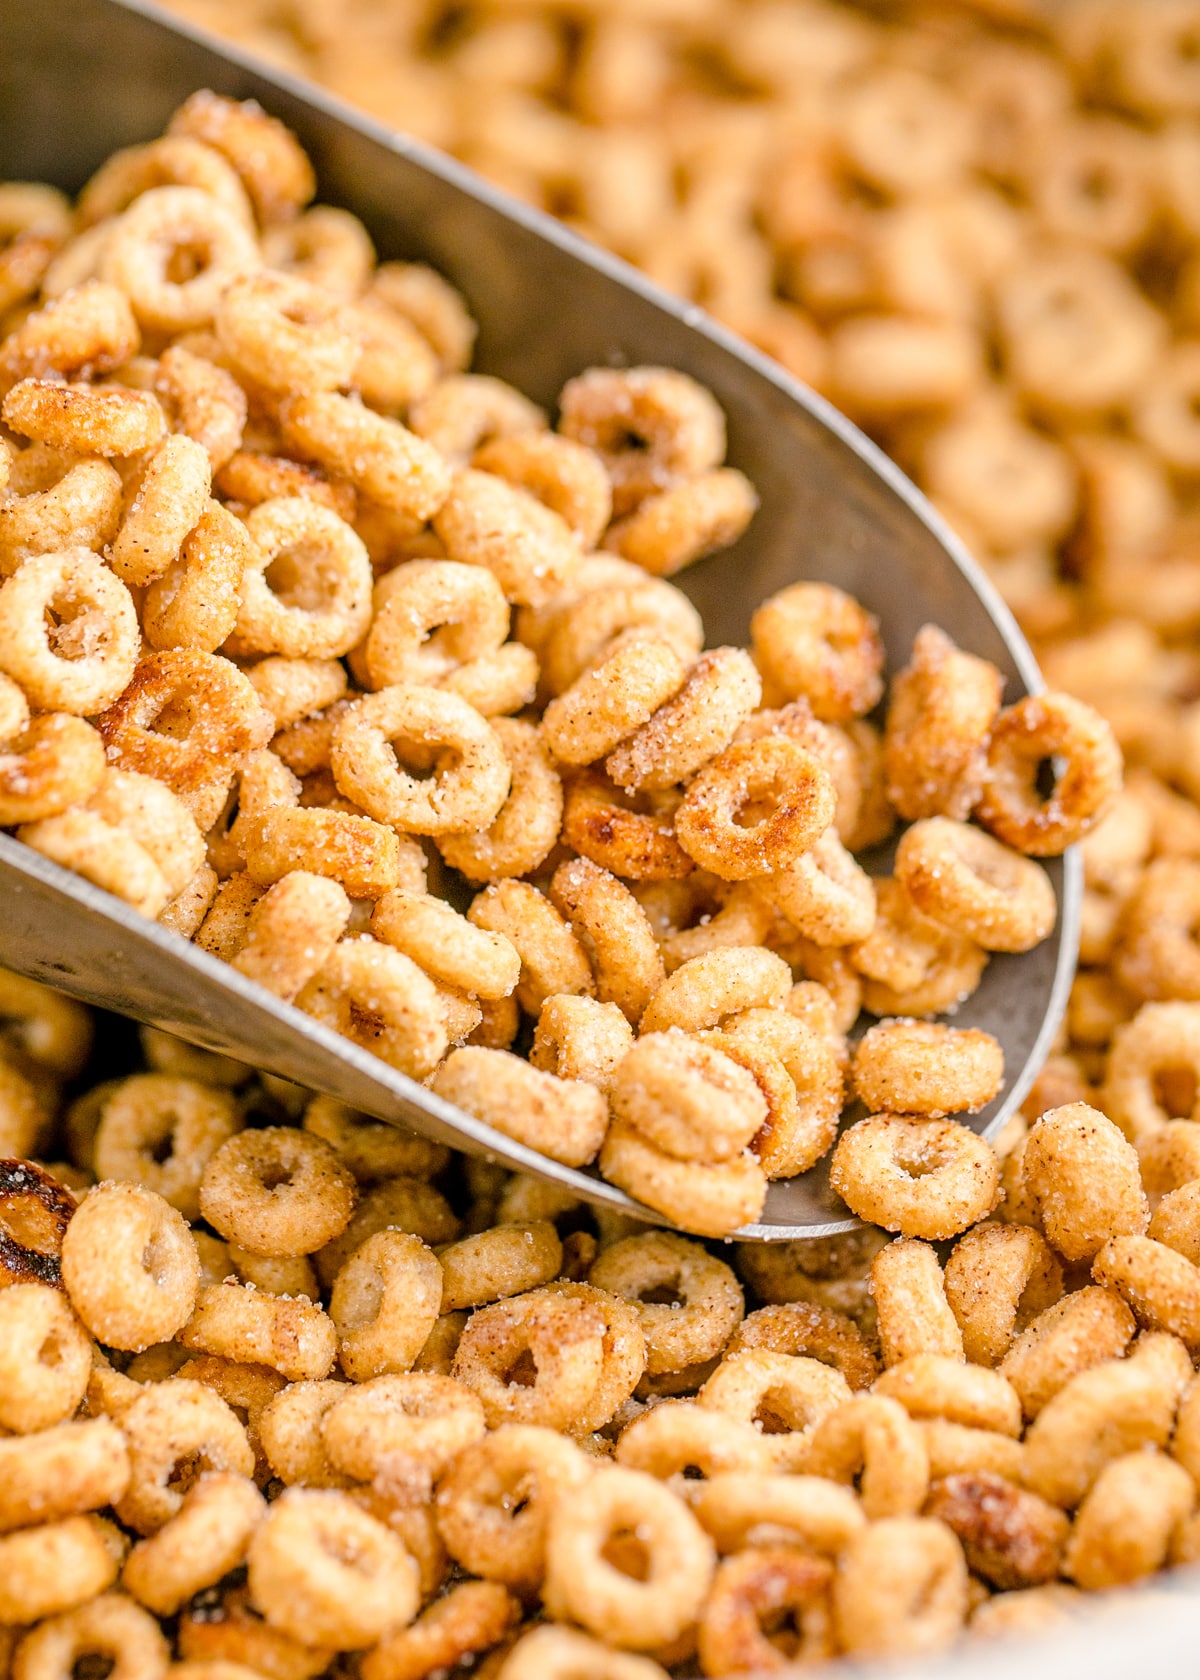 Hot buttered Cheerios that look like a little mini donuts in a metal scoop.